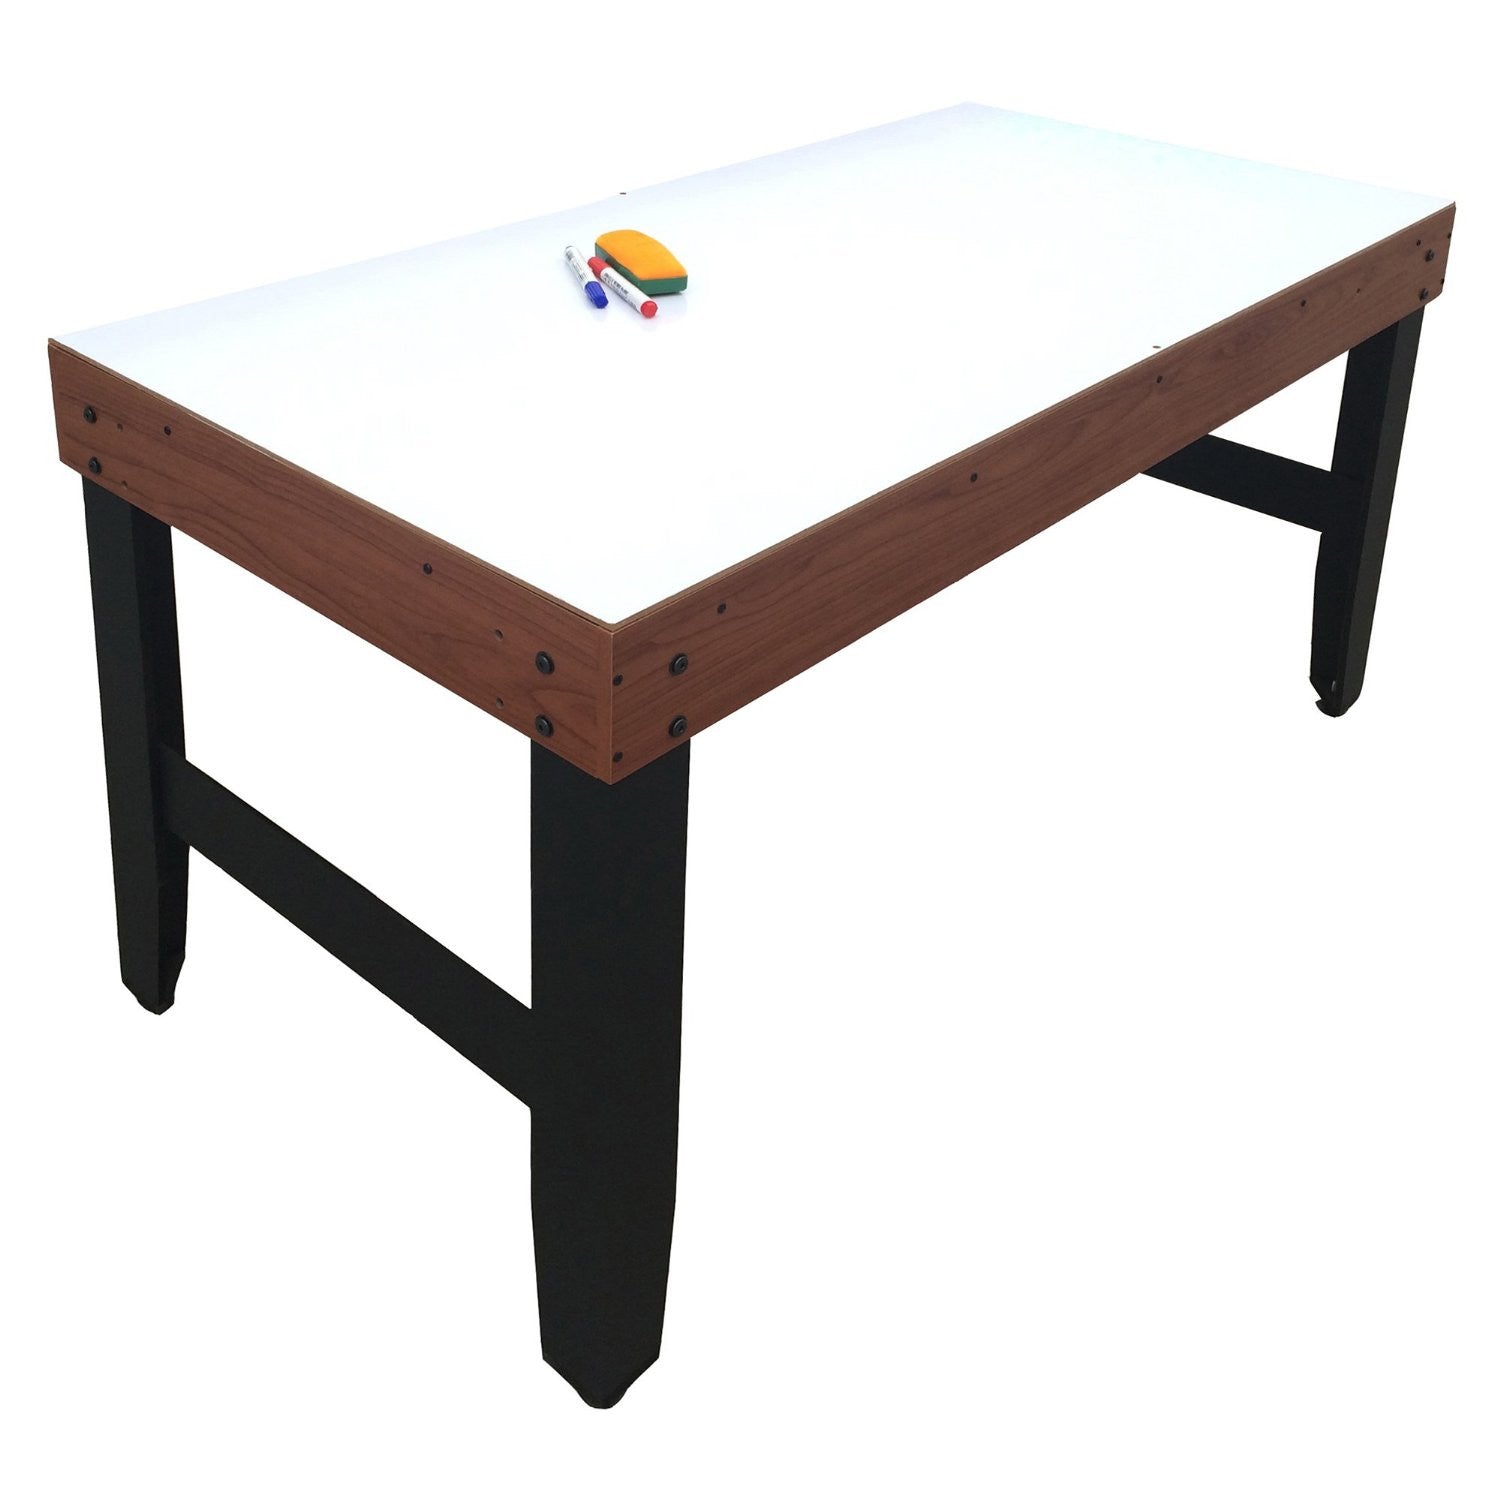 Hathaway 54" Accelerator 4-in-1 Multi-Game Table